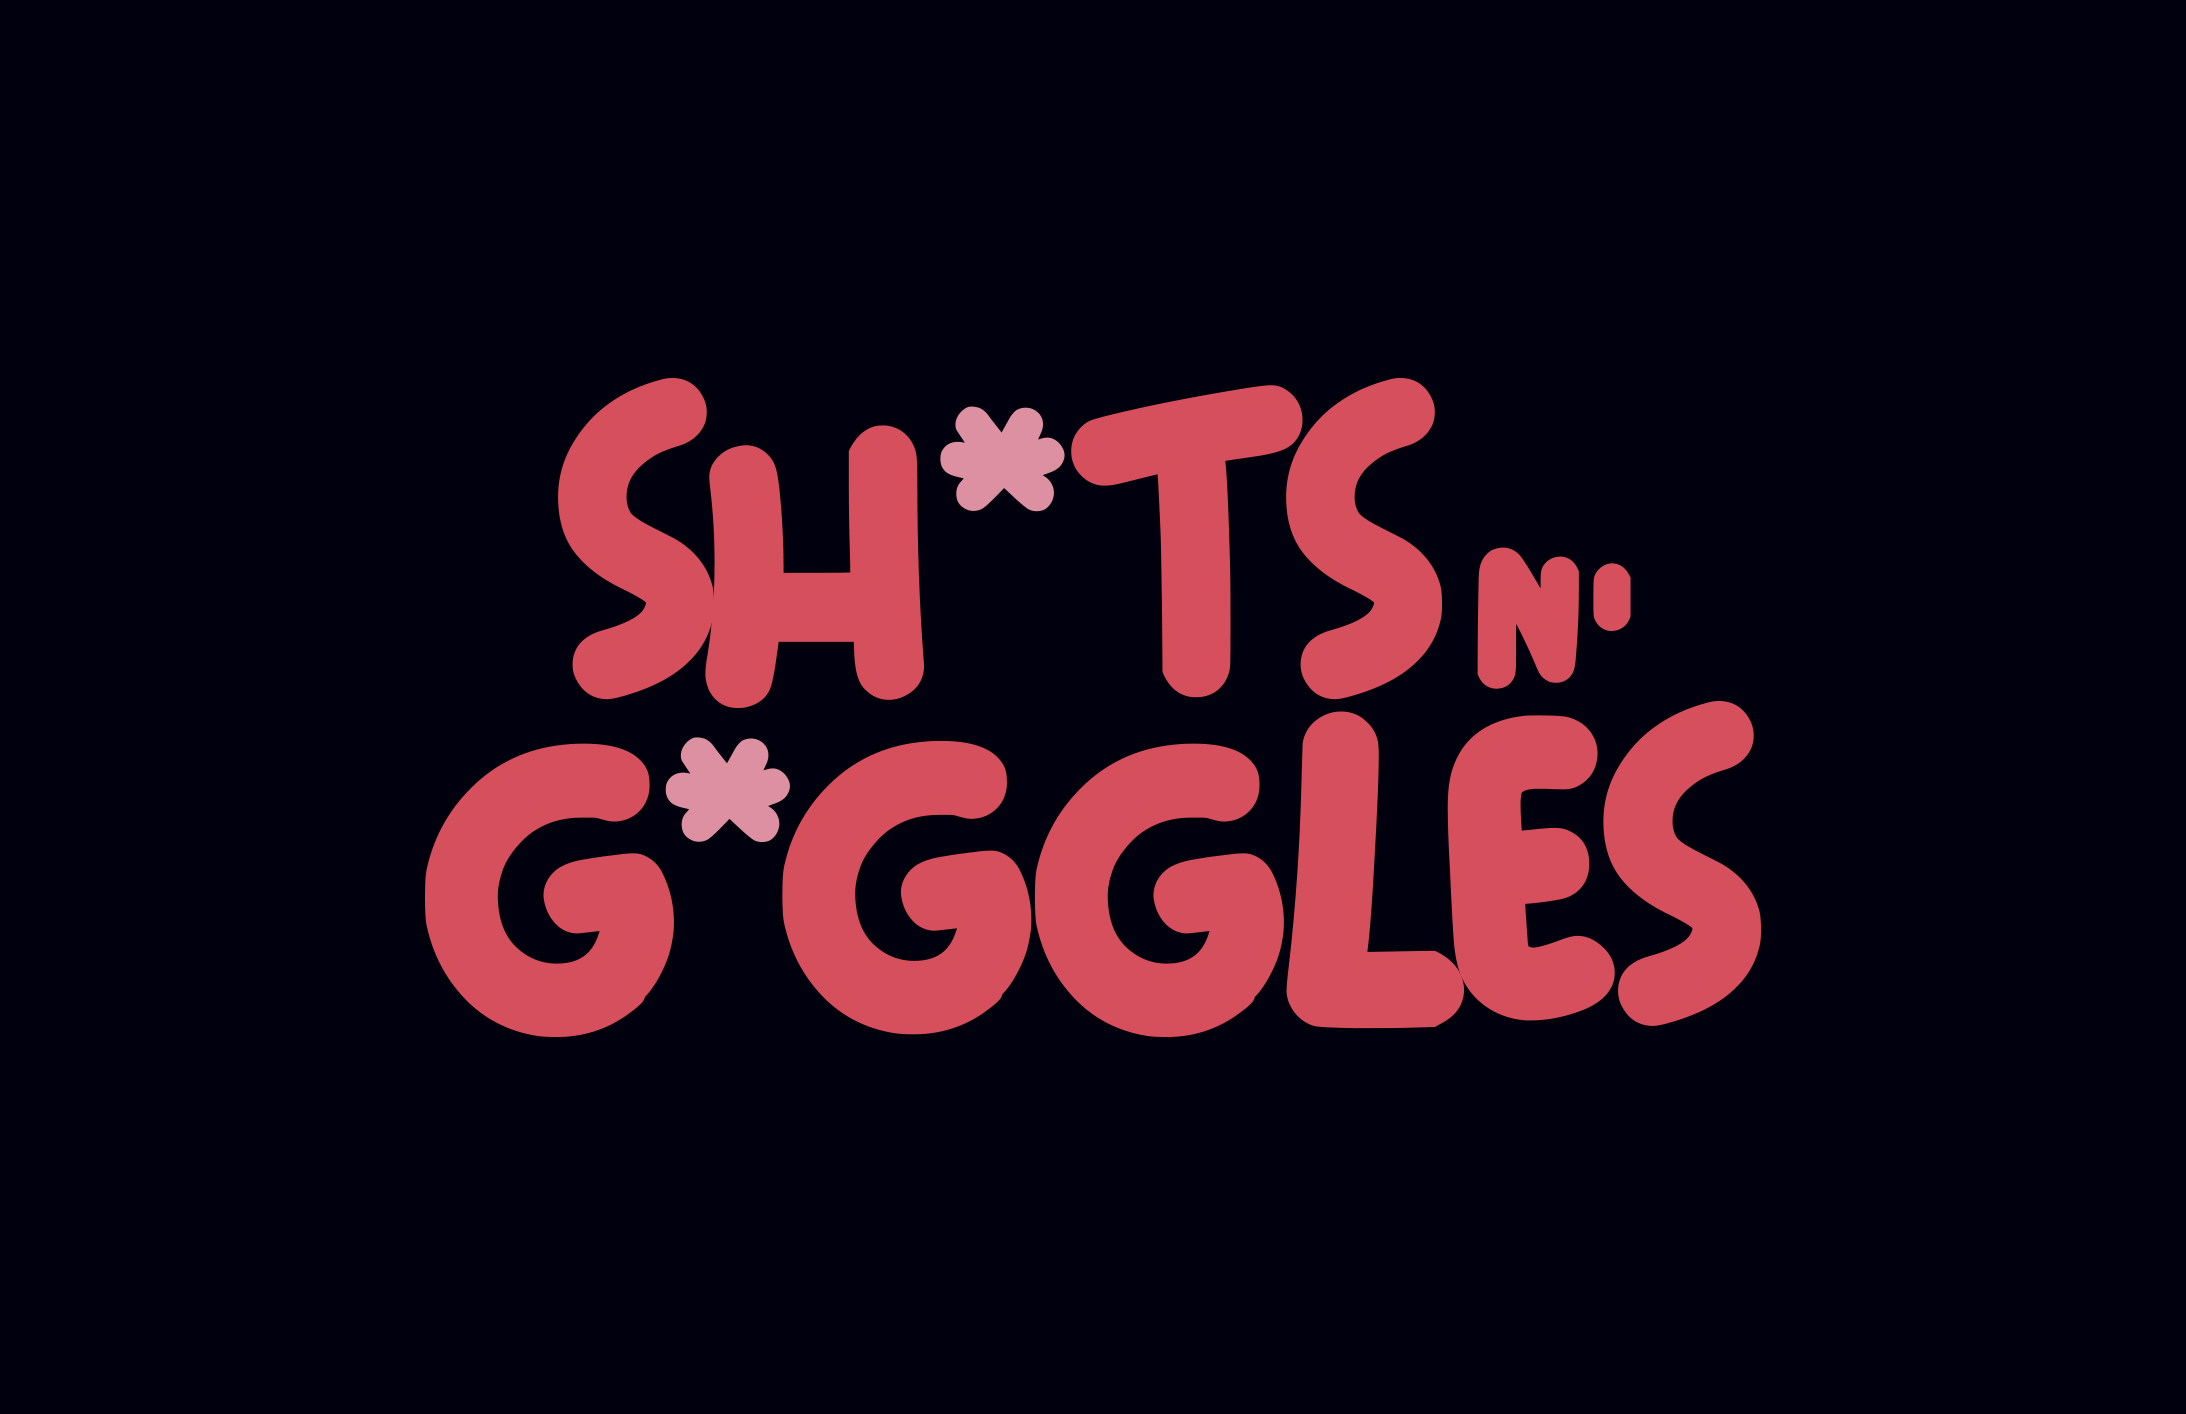 Crohn's & Colitis UK & The Comedy Store Advertising Campaign Video explaining concept by Estelle Naderi. Thumbnail shows ' Sh*ts n' G*ggles' text in pink on black background.